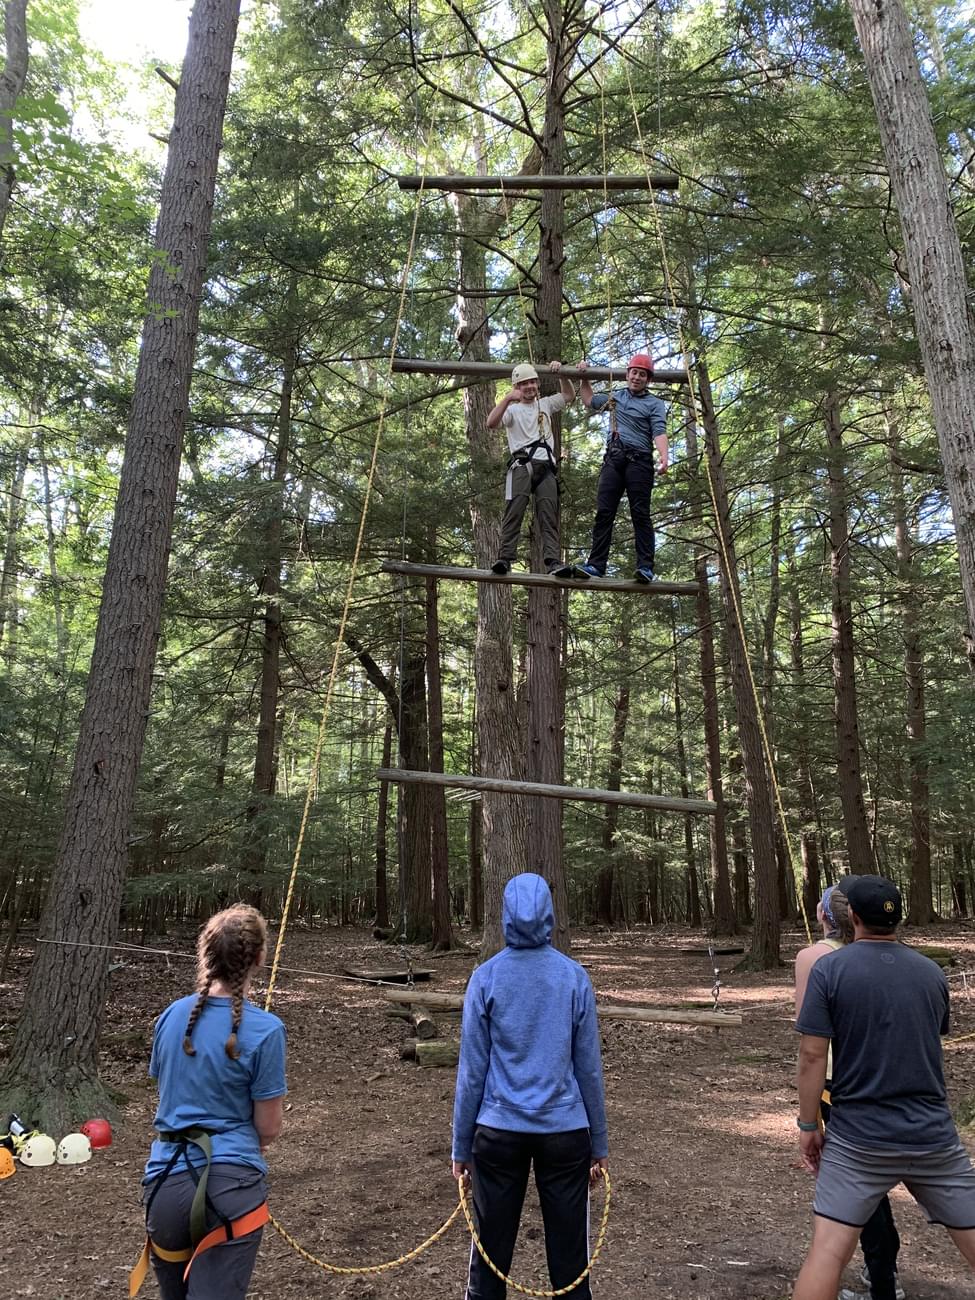 Houghton students standing on ropes course element during Highlander Wilderness Adventure.